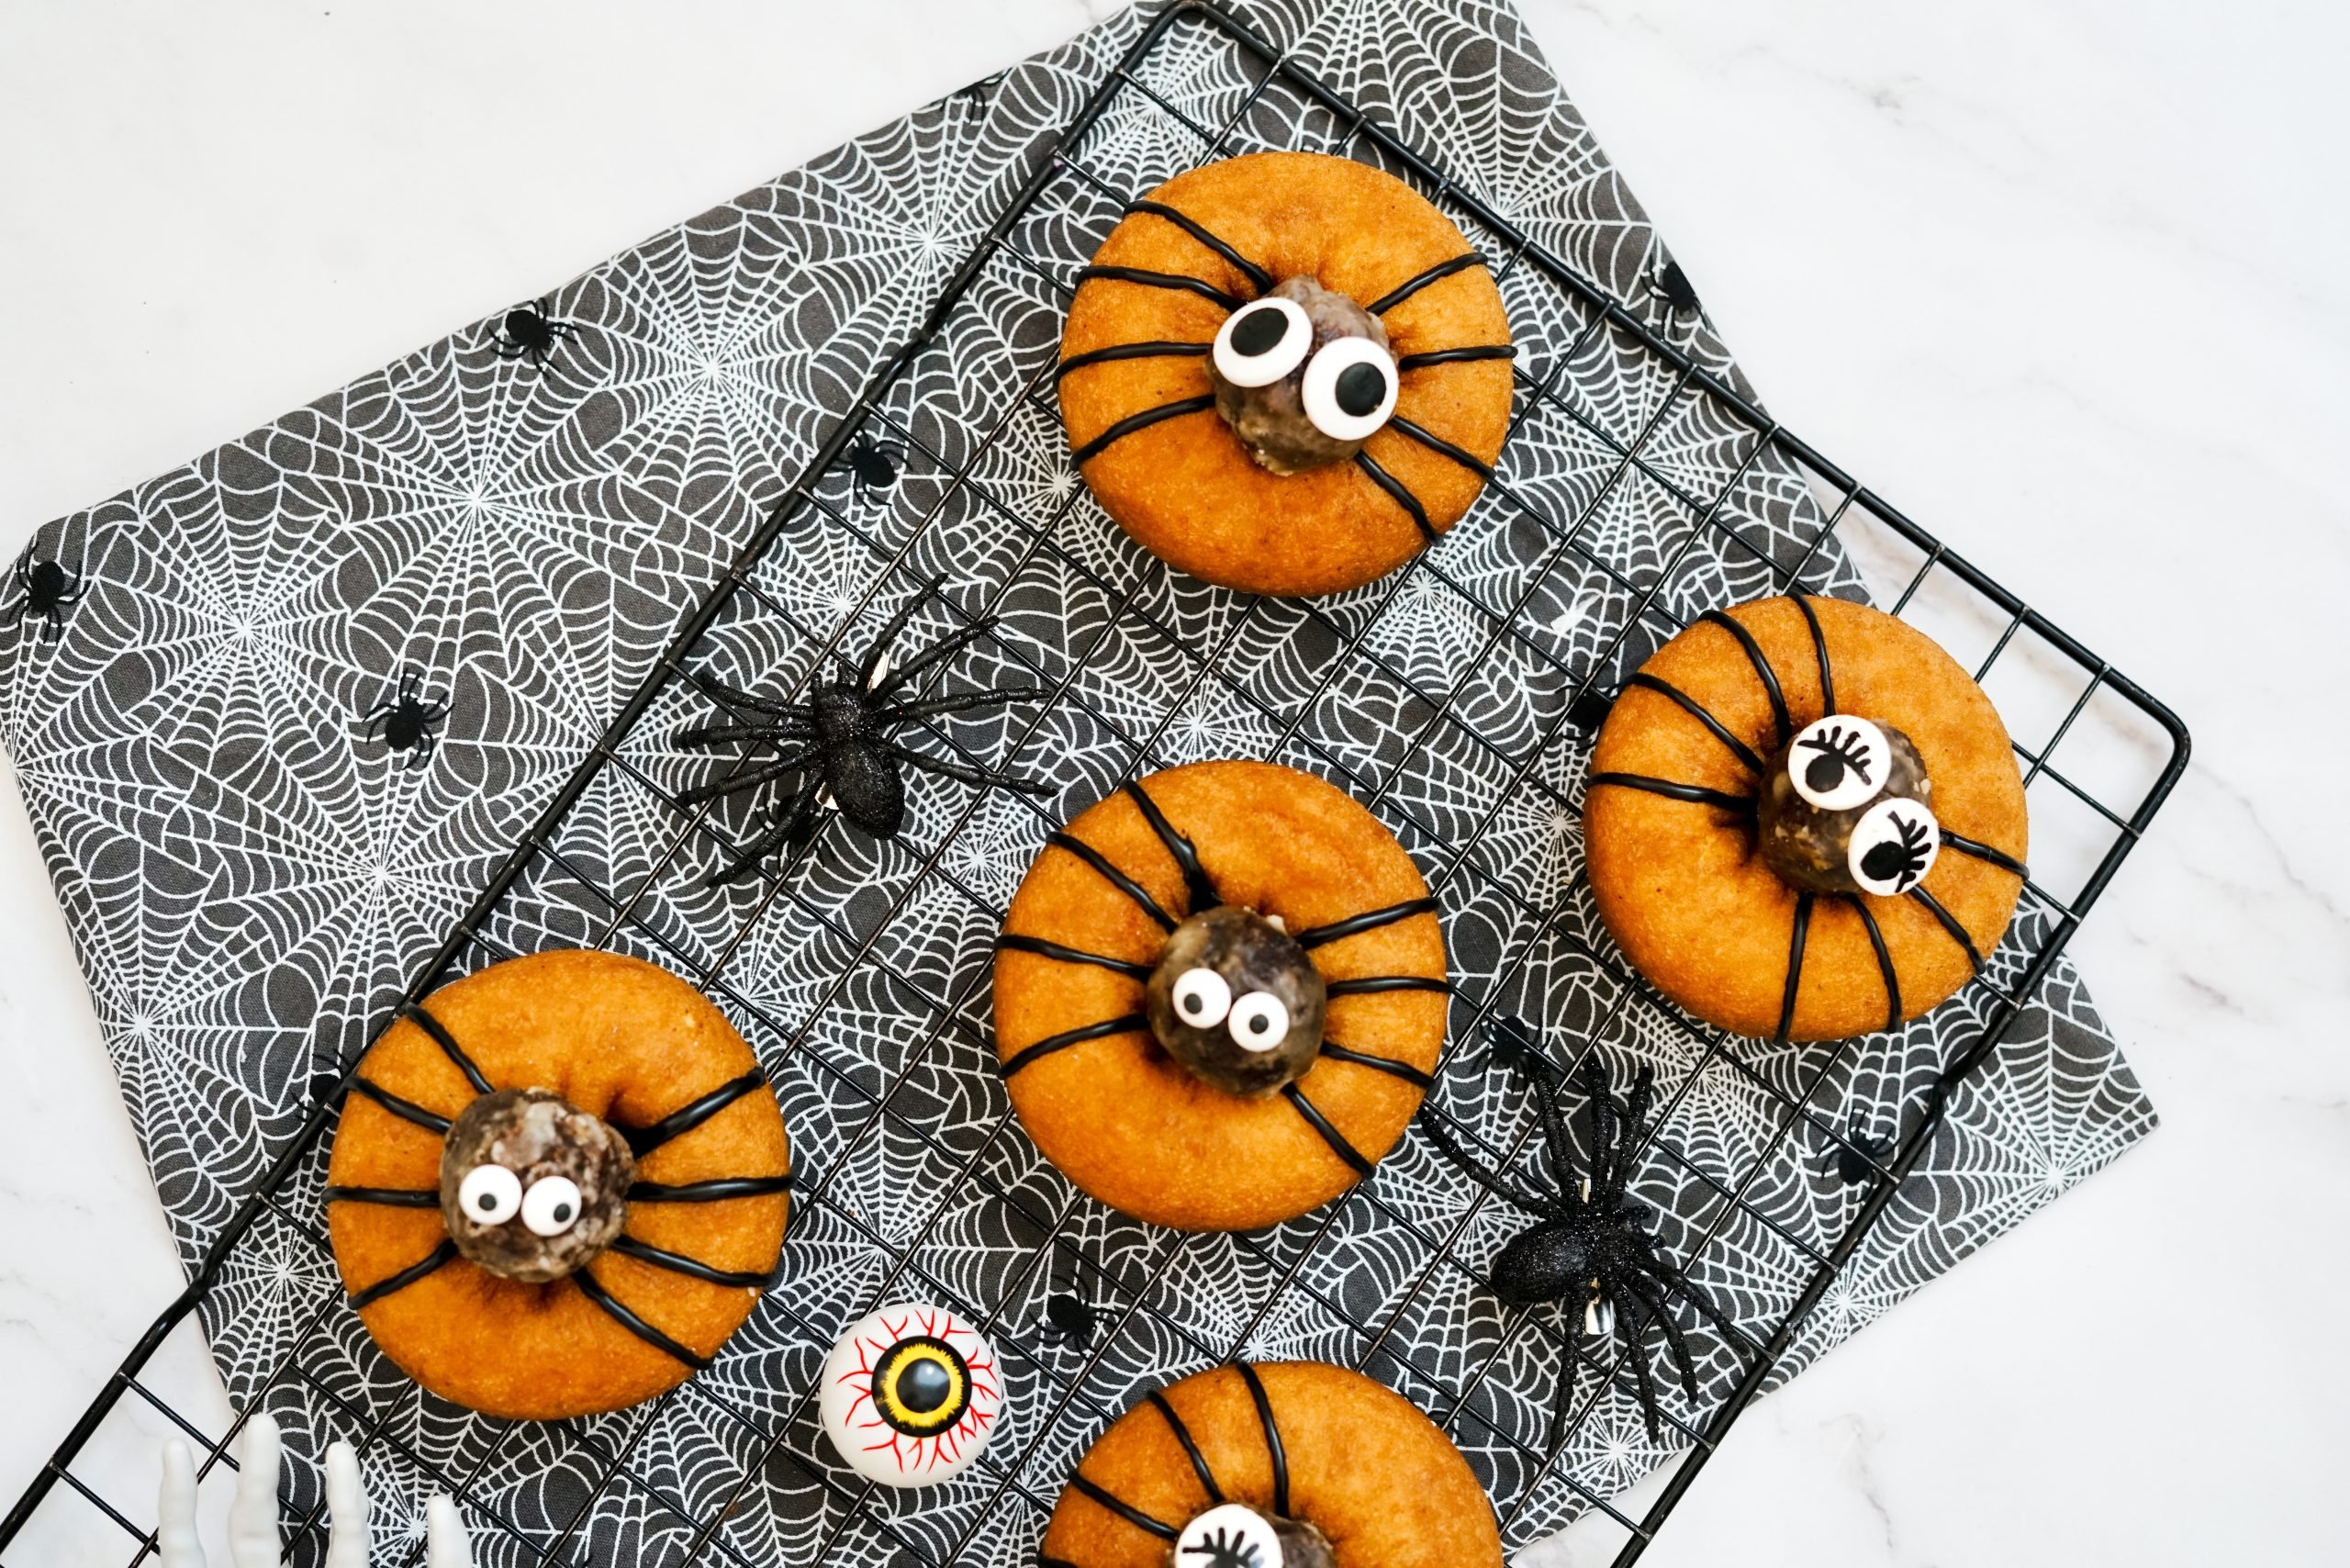 no bake halloween desserts on tray with spooky decor